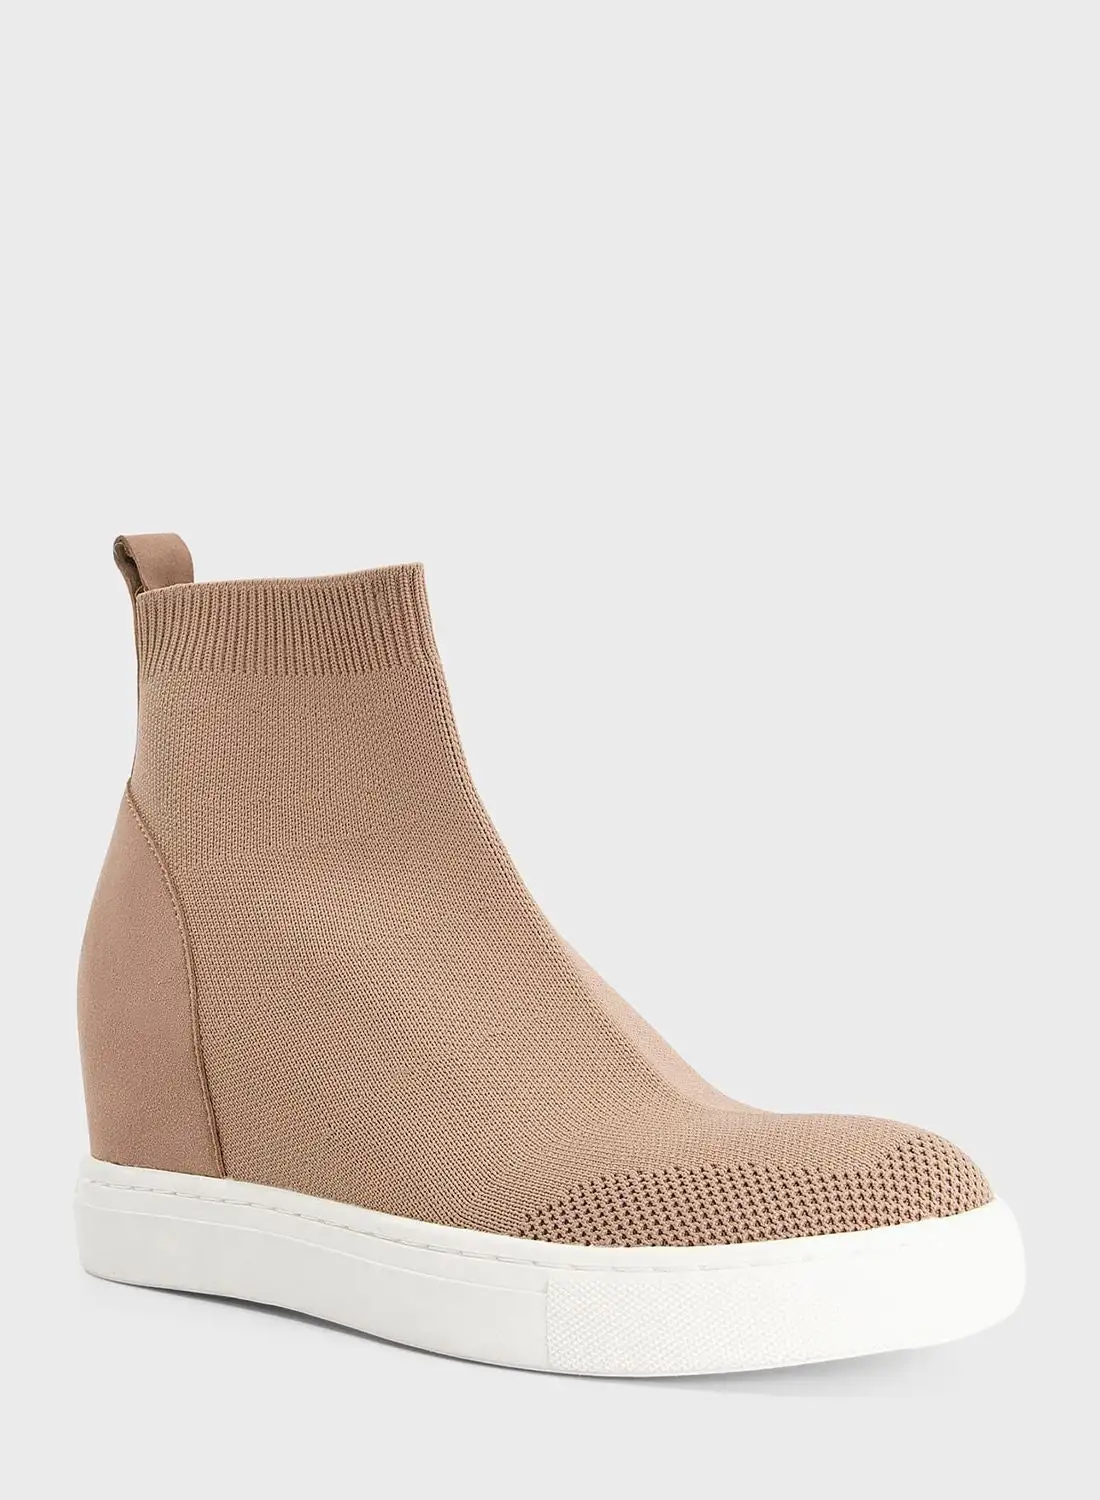 Dune LONDON Empower High Top Sneakers